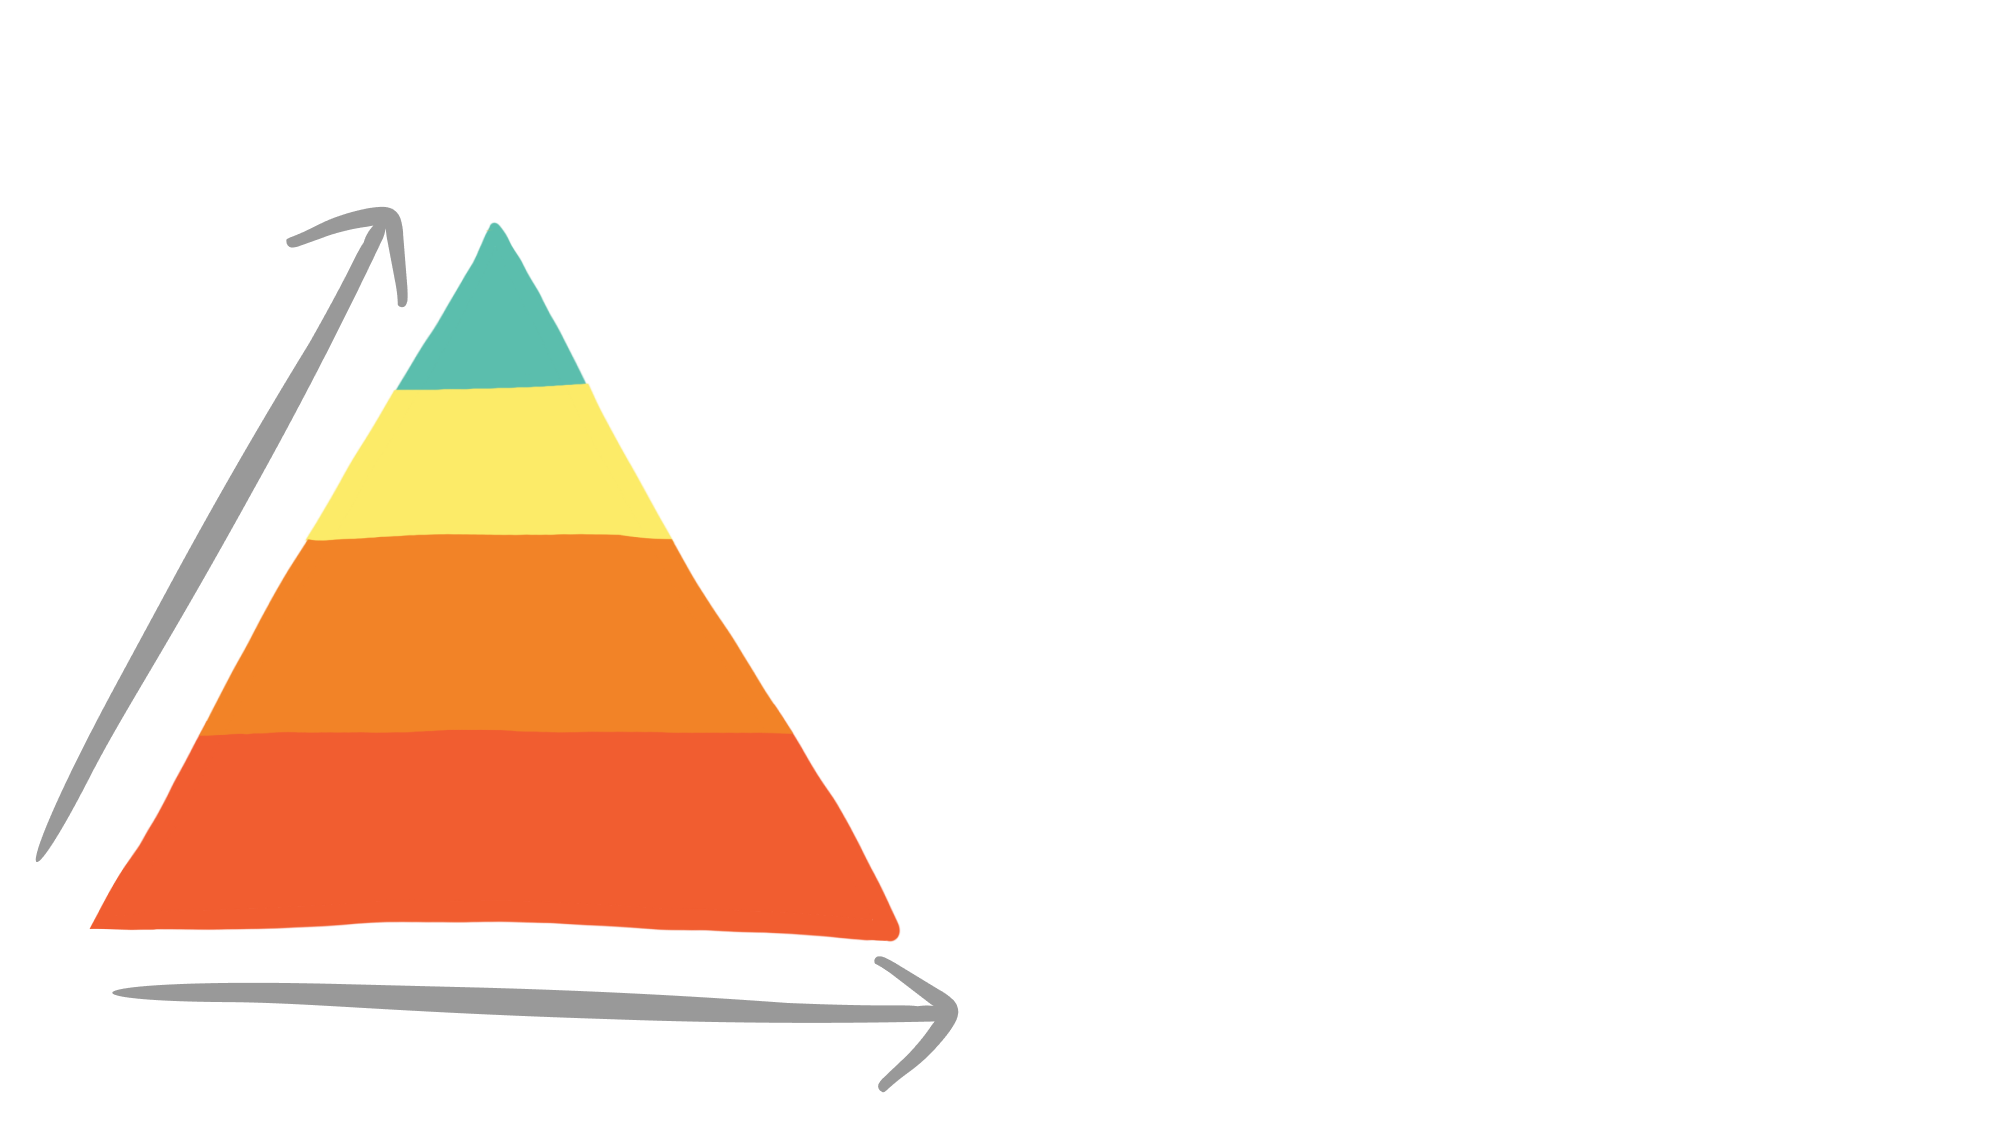 A triangle where at the bottom is expert opinion. It is very available but not reliable. One step up is observational studies, which are less available but slightly more reliable. Another step up is randomized controlled tests, which are highly reliable but not very available. Finally, the small point at the top is a systematic review. It's only possible when you look and weight all available evidence, and it points to value, which is the goal.